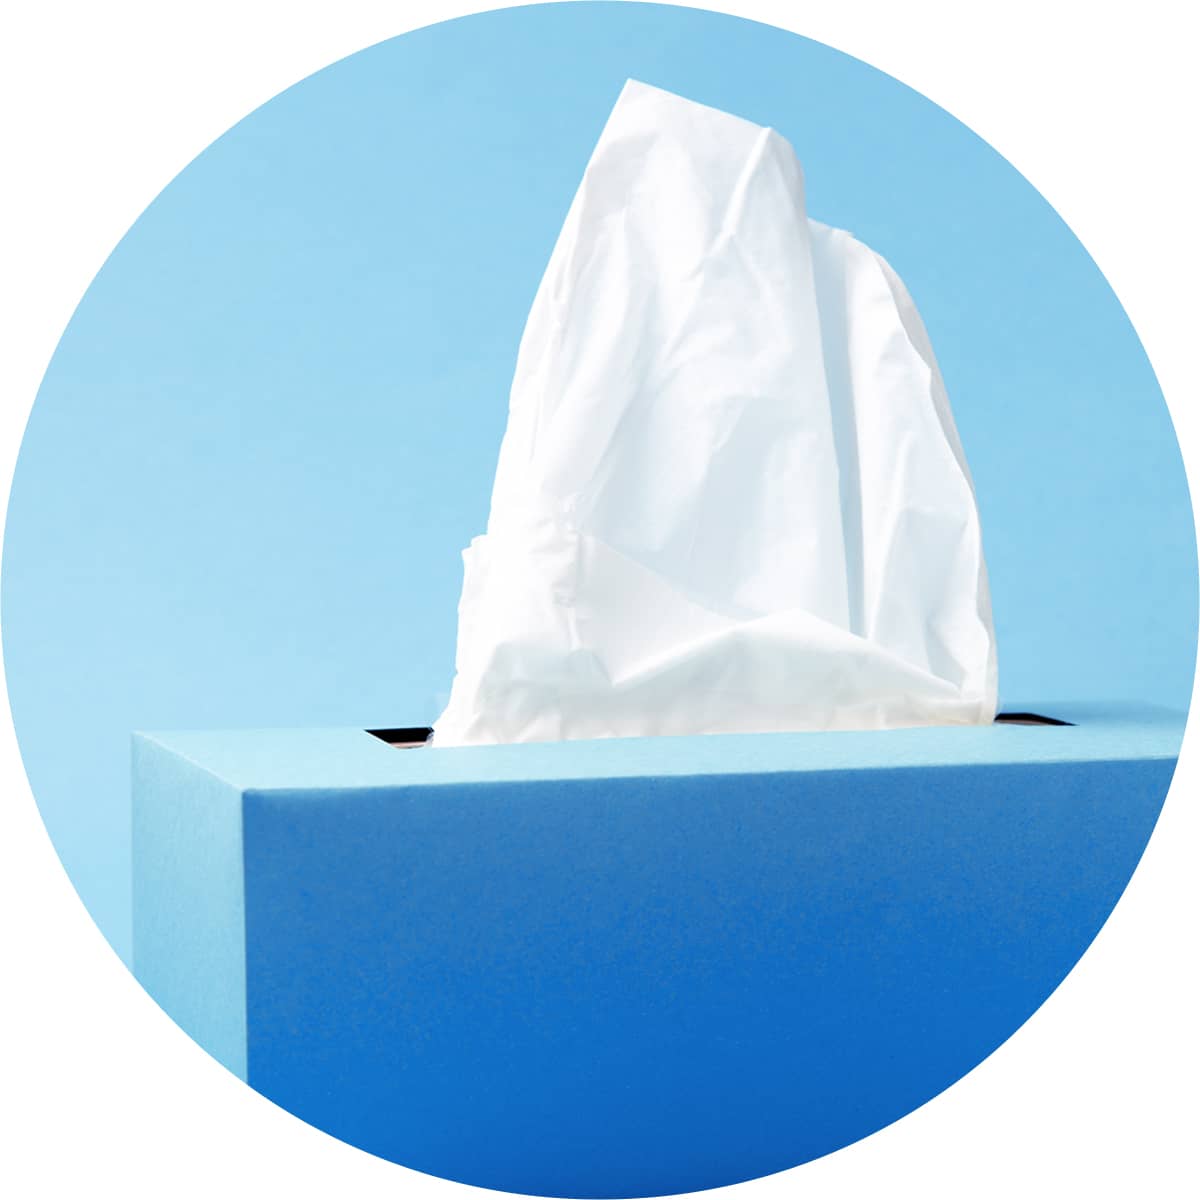 Shop for cough, cold and flu relief products, showing a tissue ready to be taken from a box